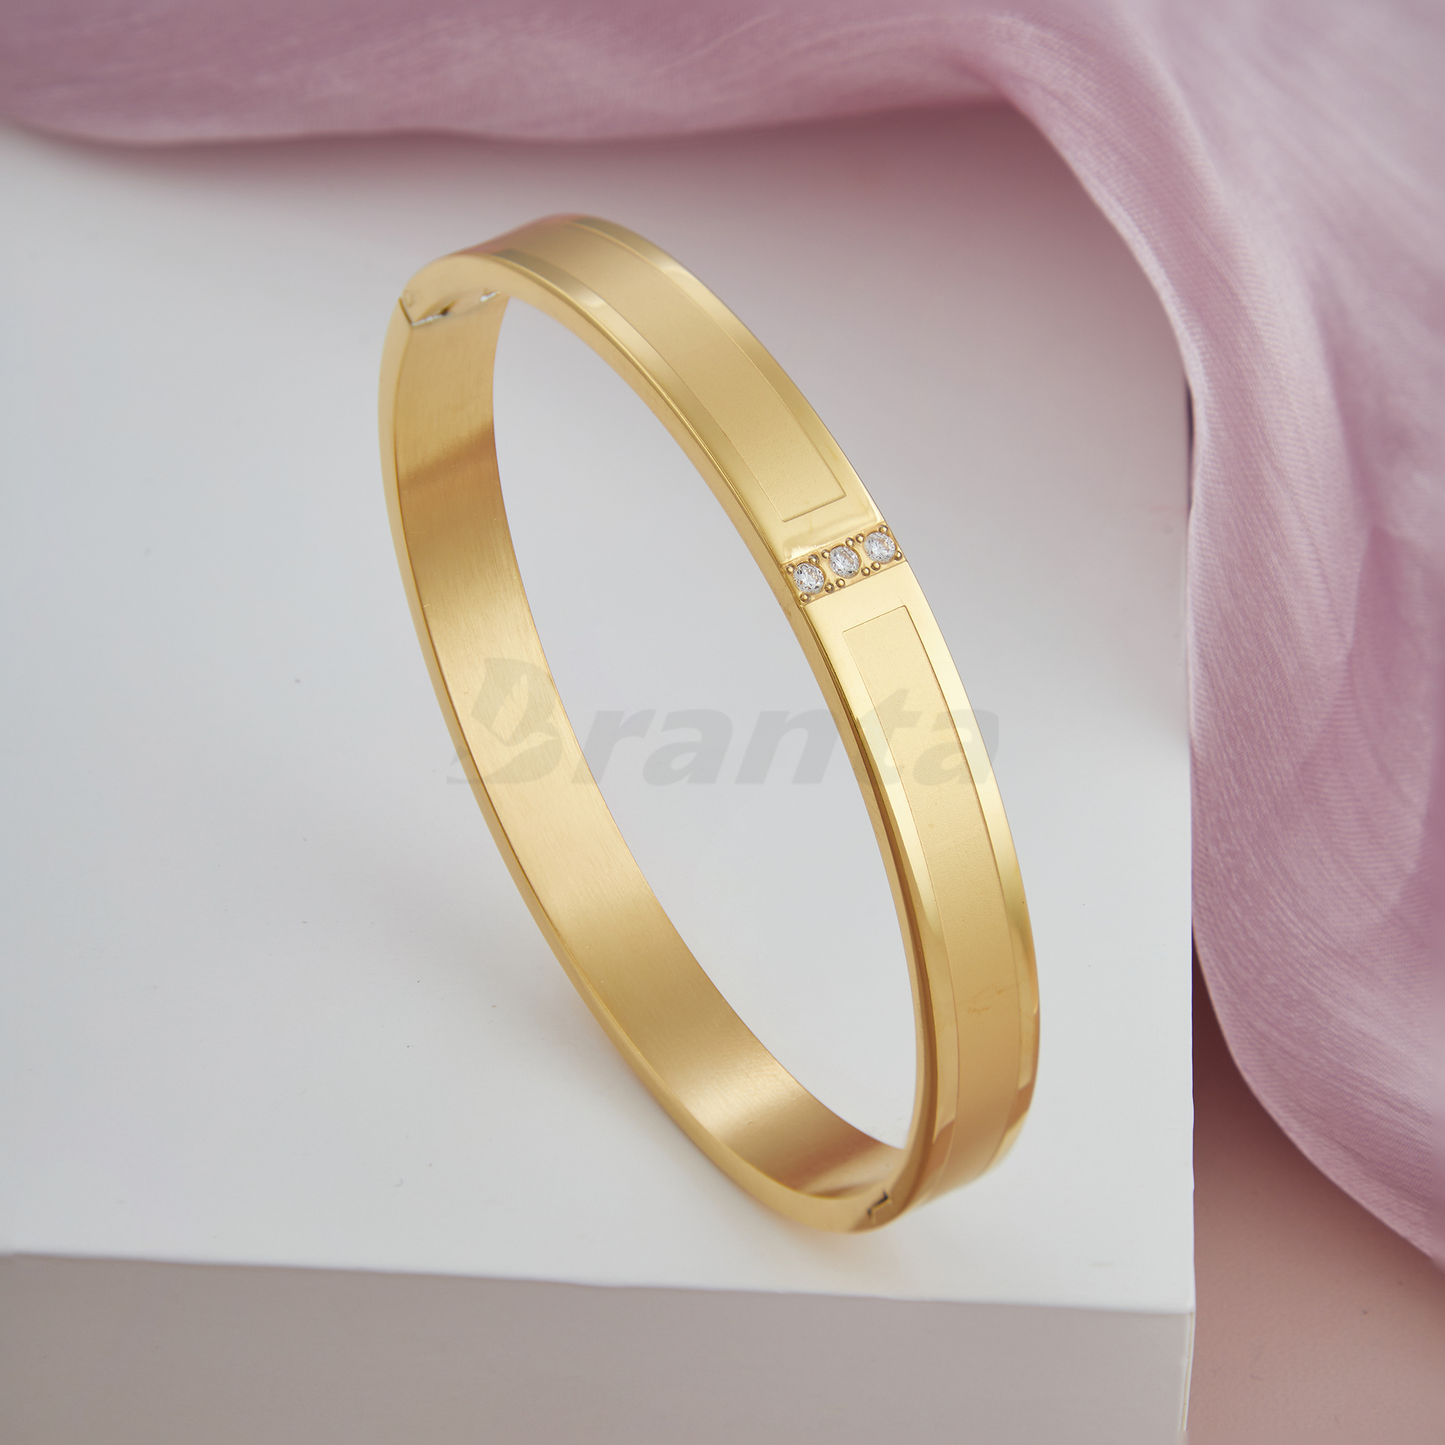 Matte and Shiny Finish with Three  Diamond Gold Bracelet for Men